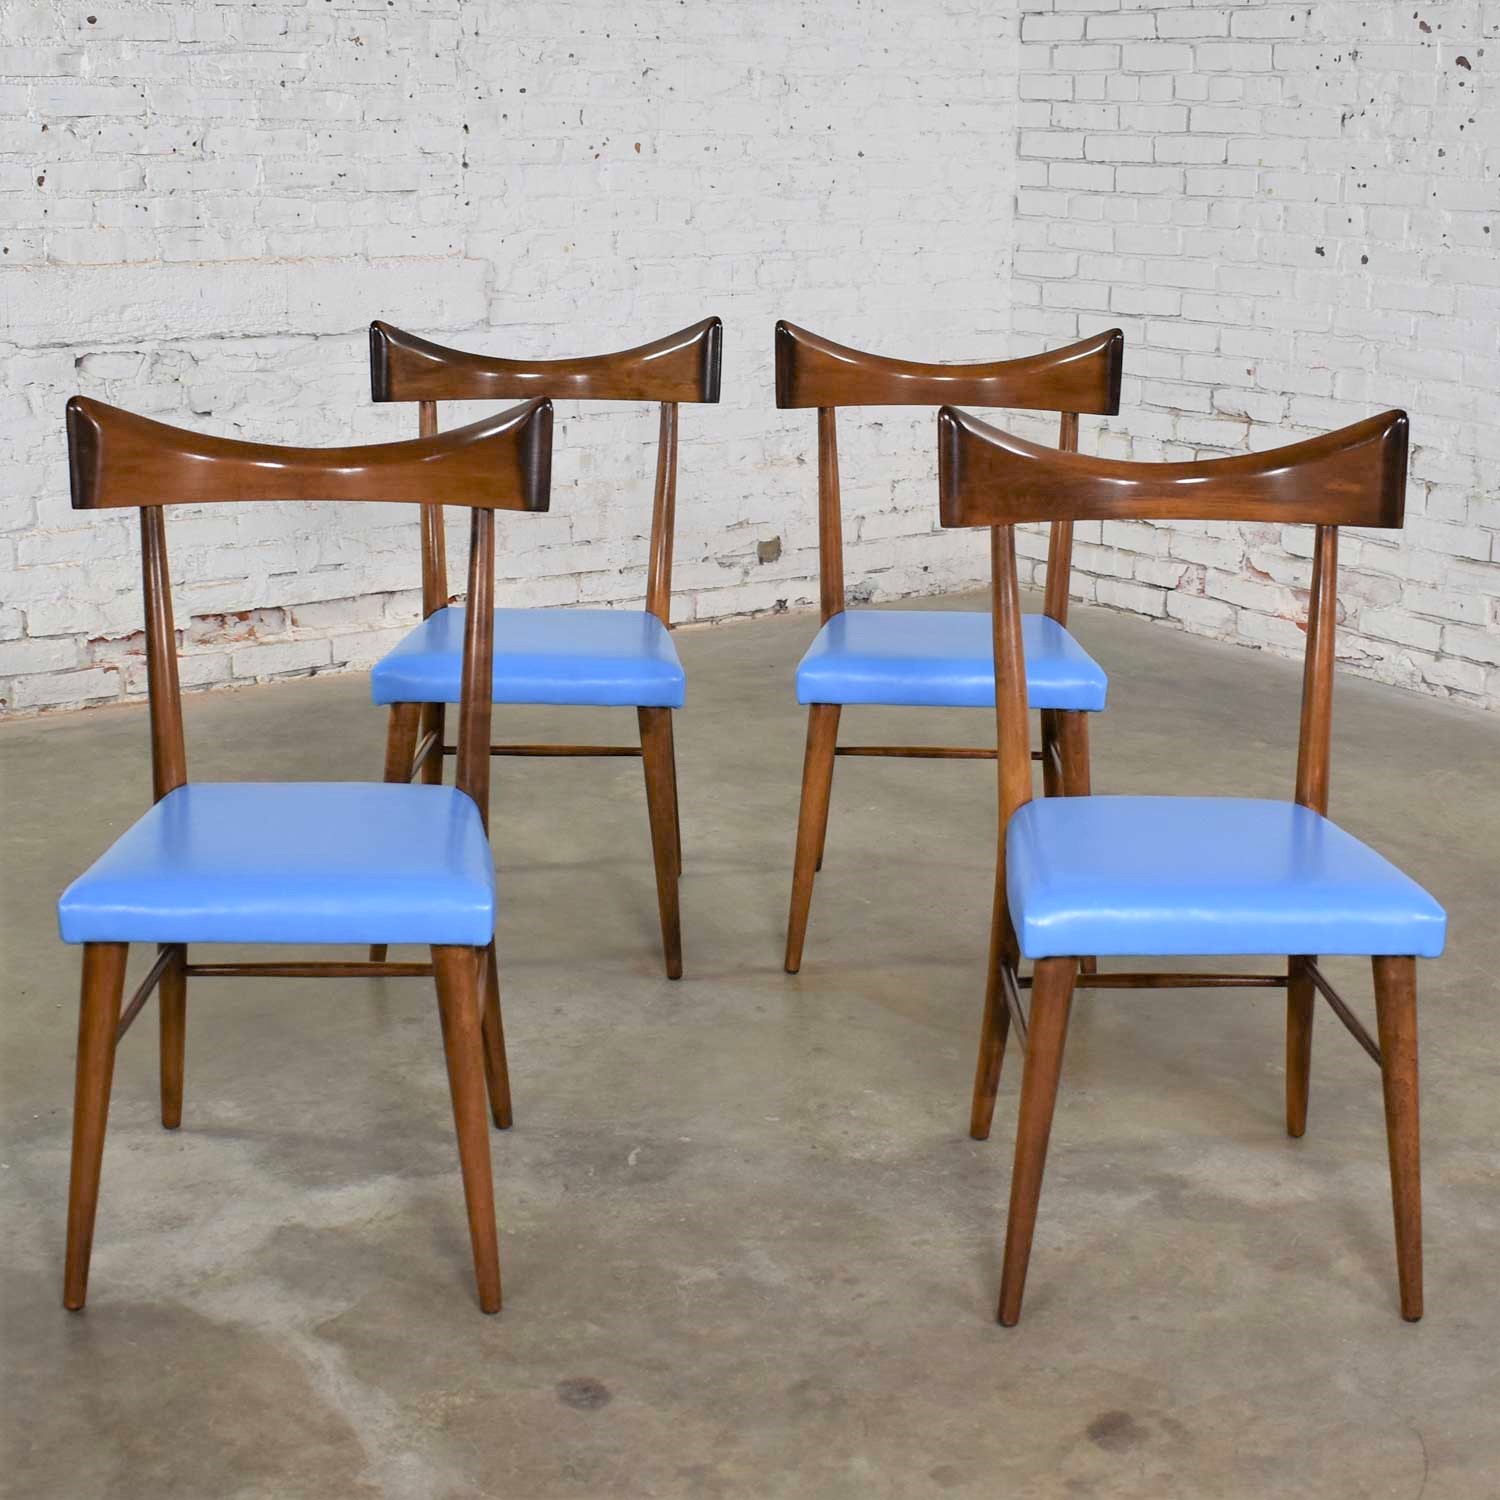 Set 4 Mid Century Modern Planner Group Dining Chairs by Paul McCobb for Winchendon